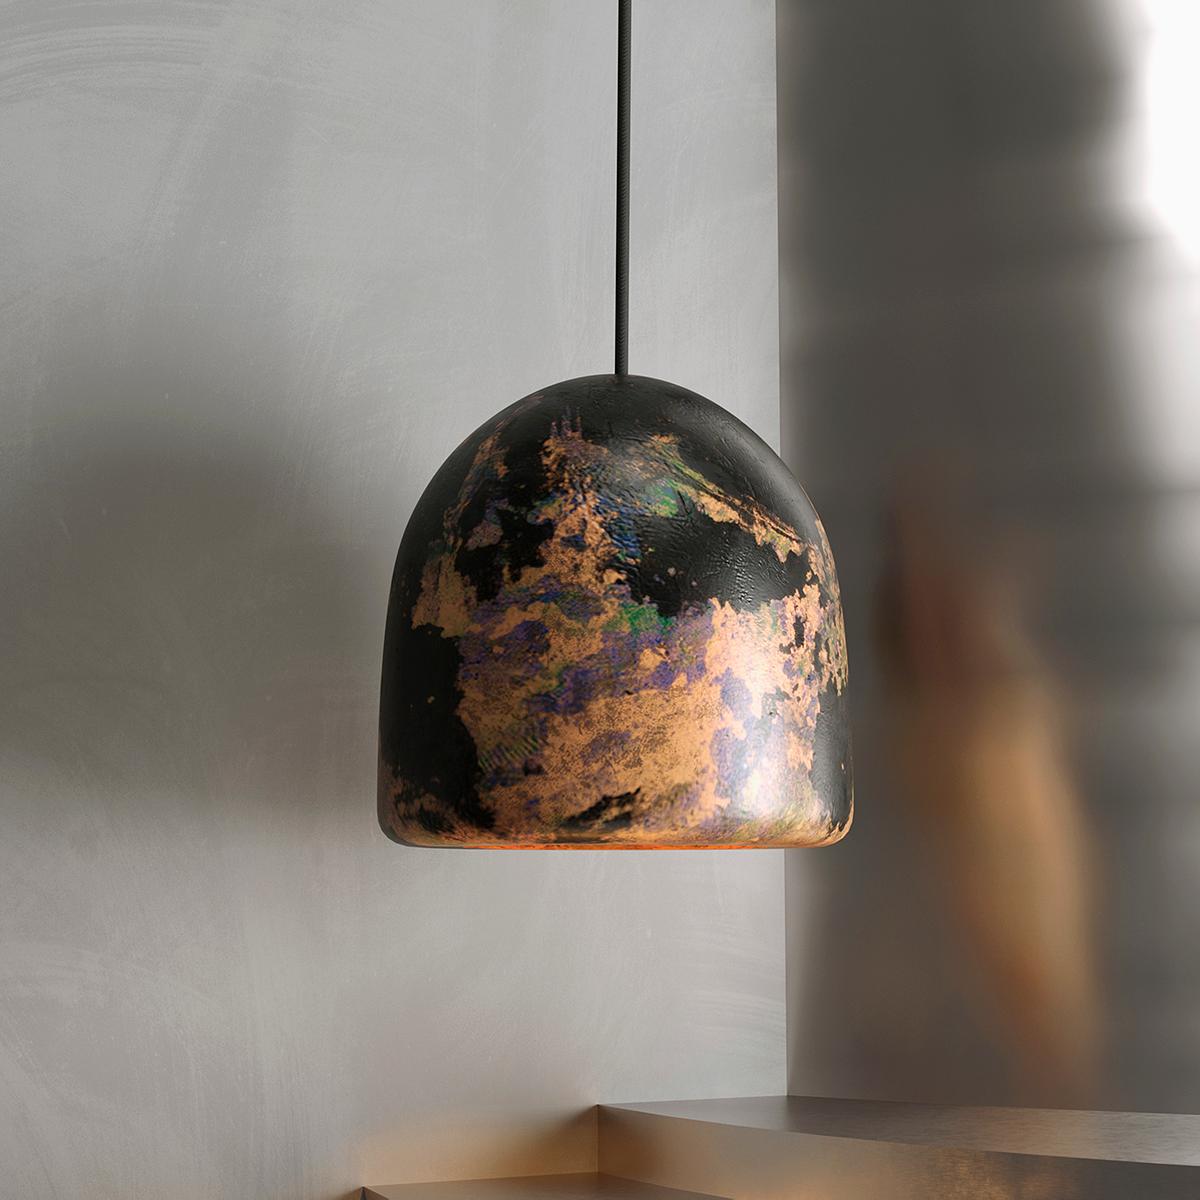 Prianyk small pendant lamp by Makhno
Dimensions: D 34 x W 34 x H 42 cm
Materials: Ceramics

All our lamps can be wired according to each country. If sold to the USA it will be wired for the USA for instance.

Makhno Studio is a workshop of